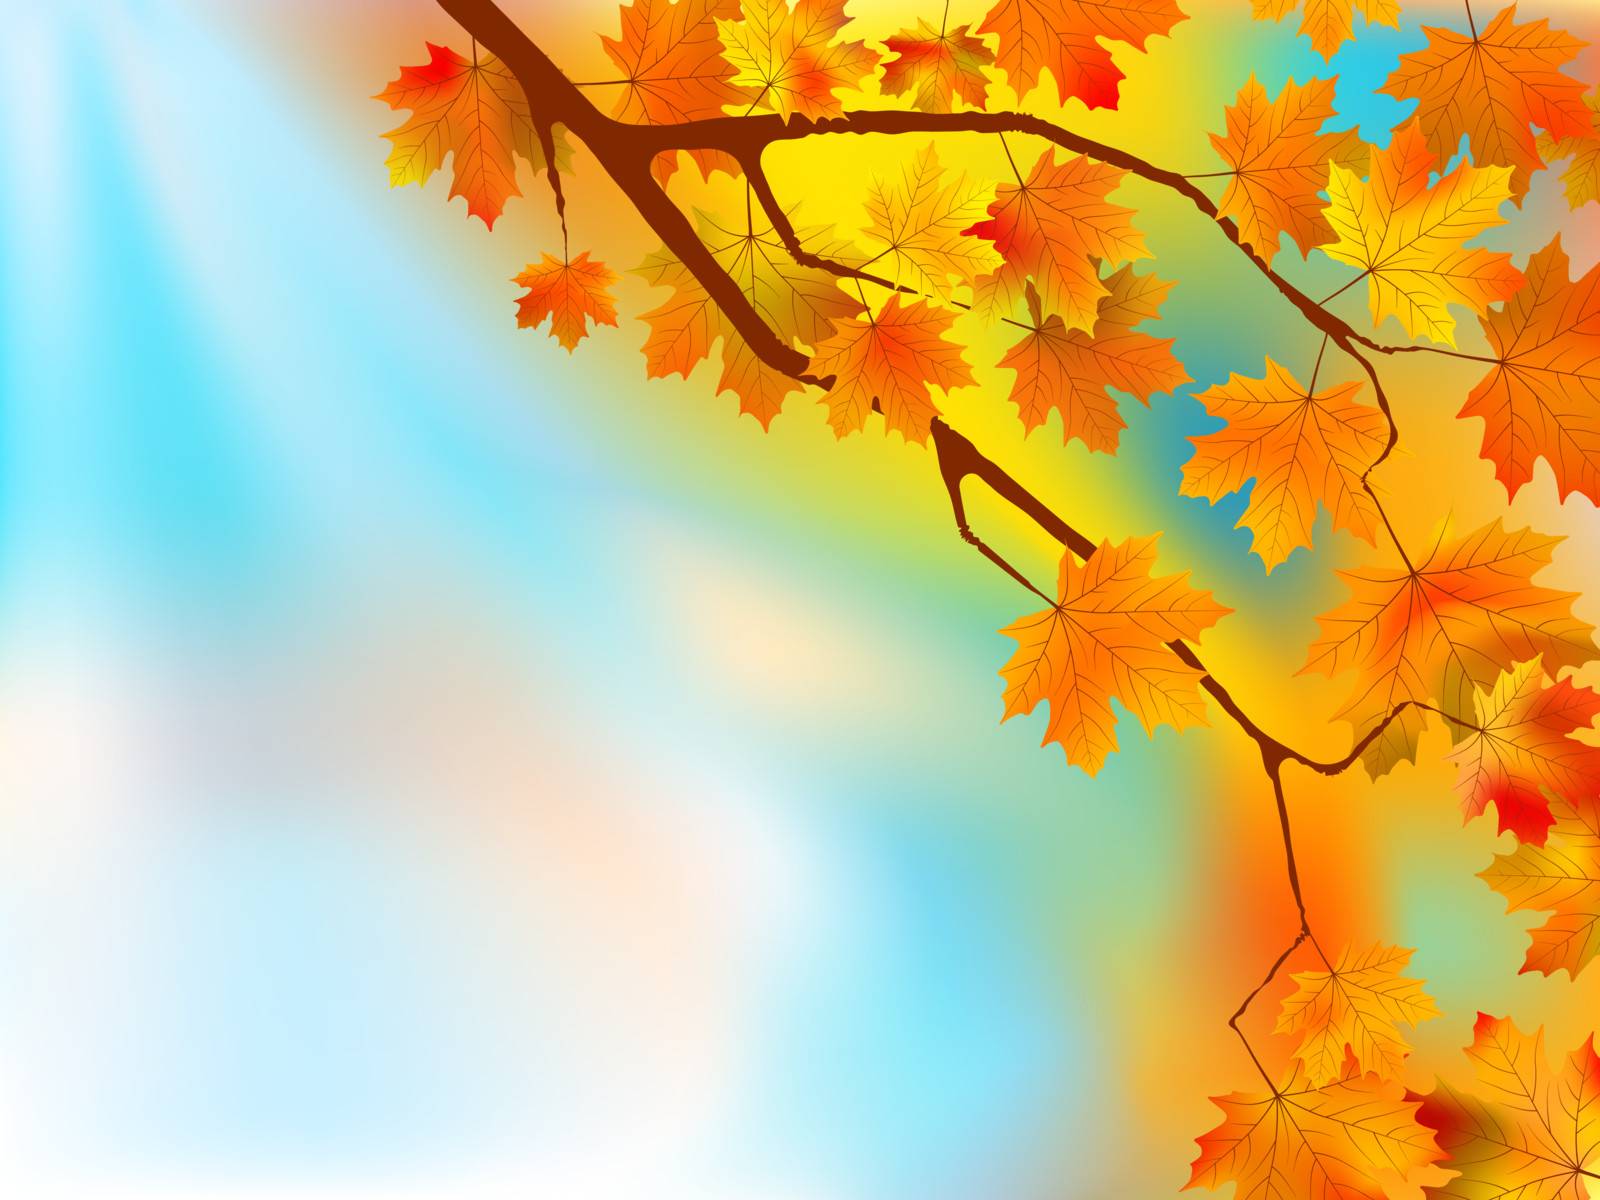 Autumn leaves background in a sunny day. EPS 8 vector file included